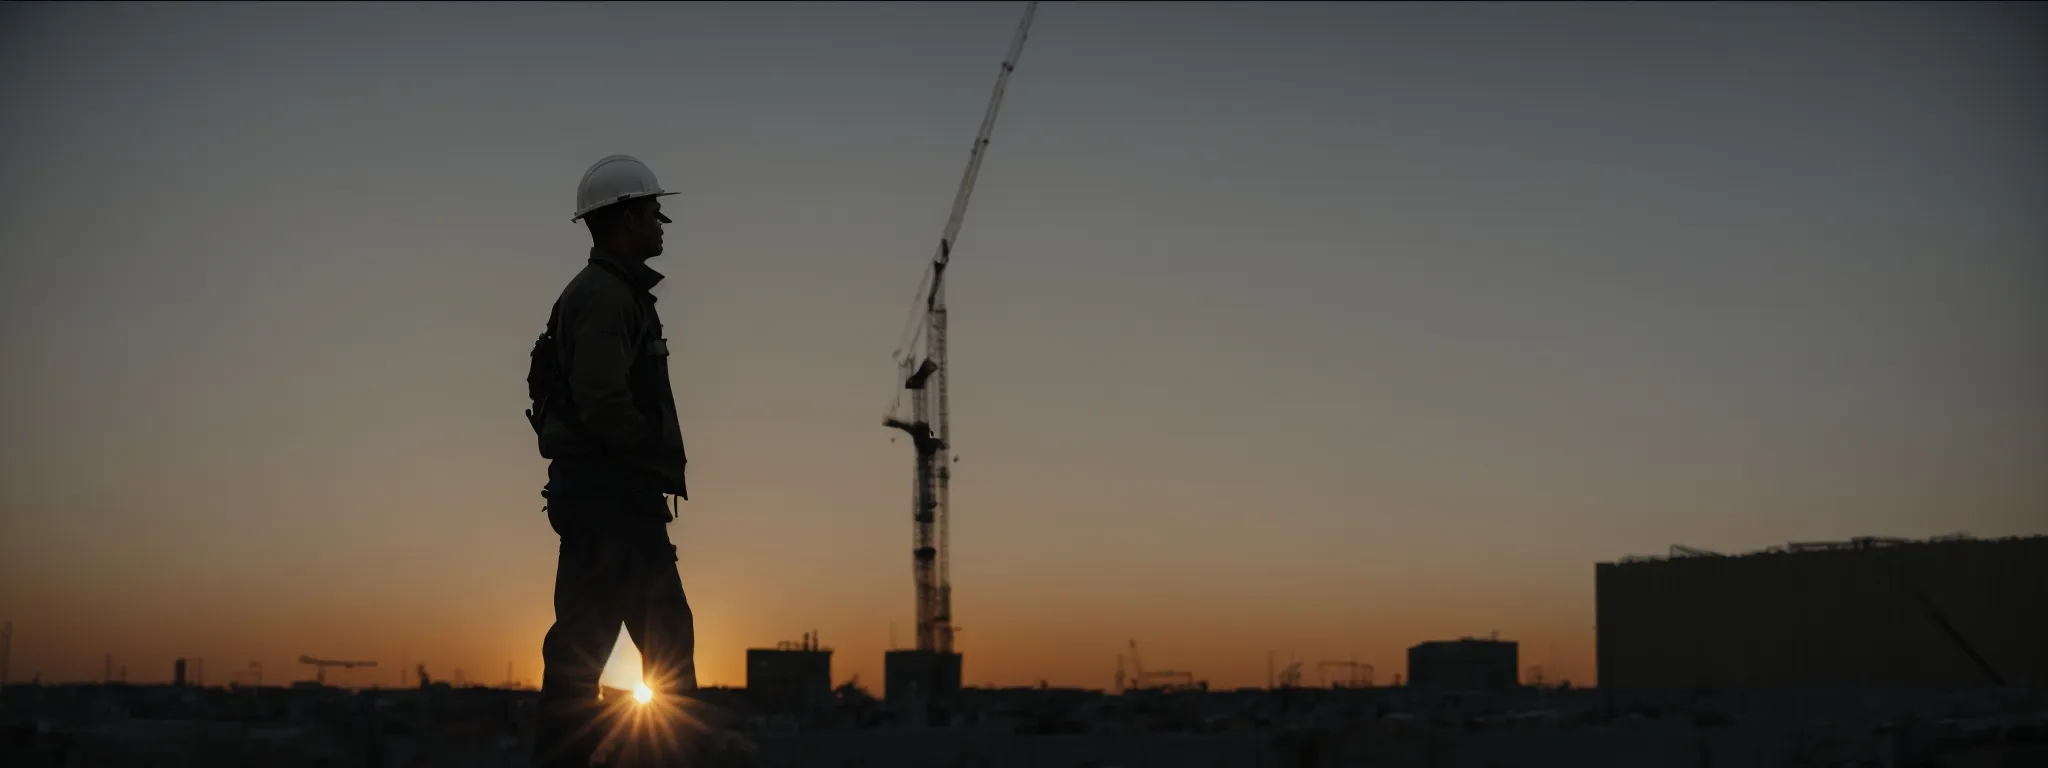 a silhouette of a construction worker with a hard hat against the backdrop of a rising or setting sun over a construction site.